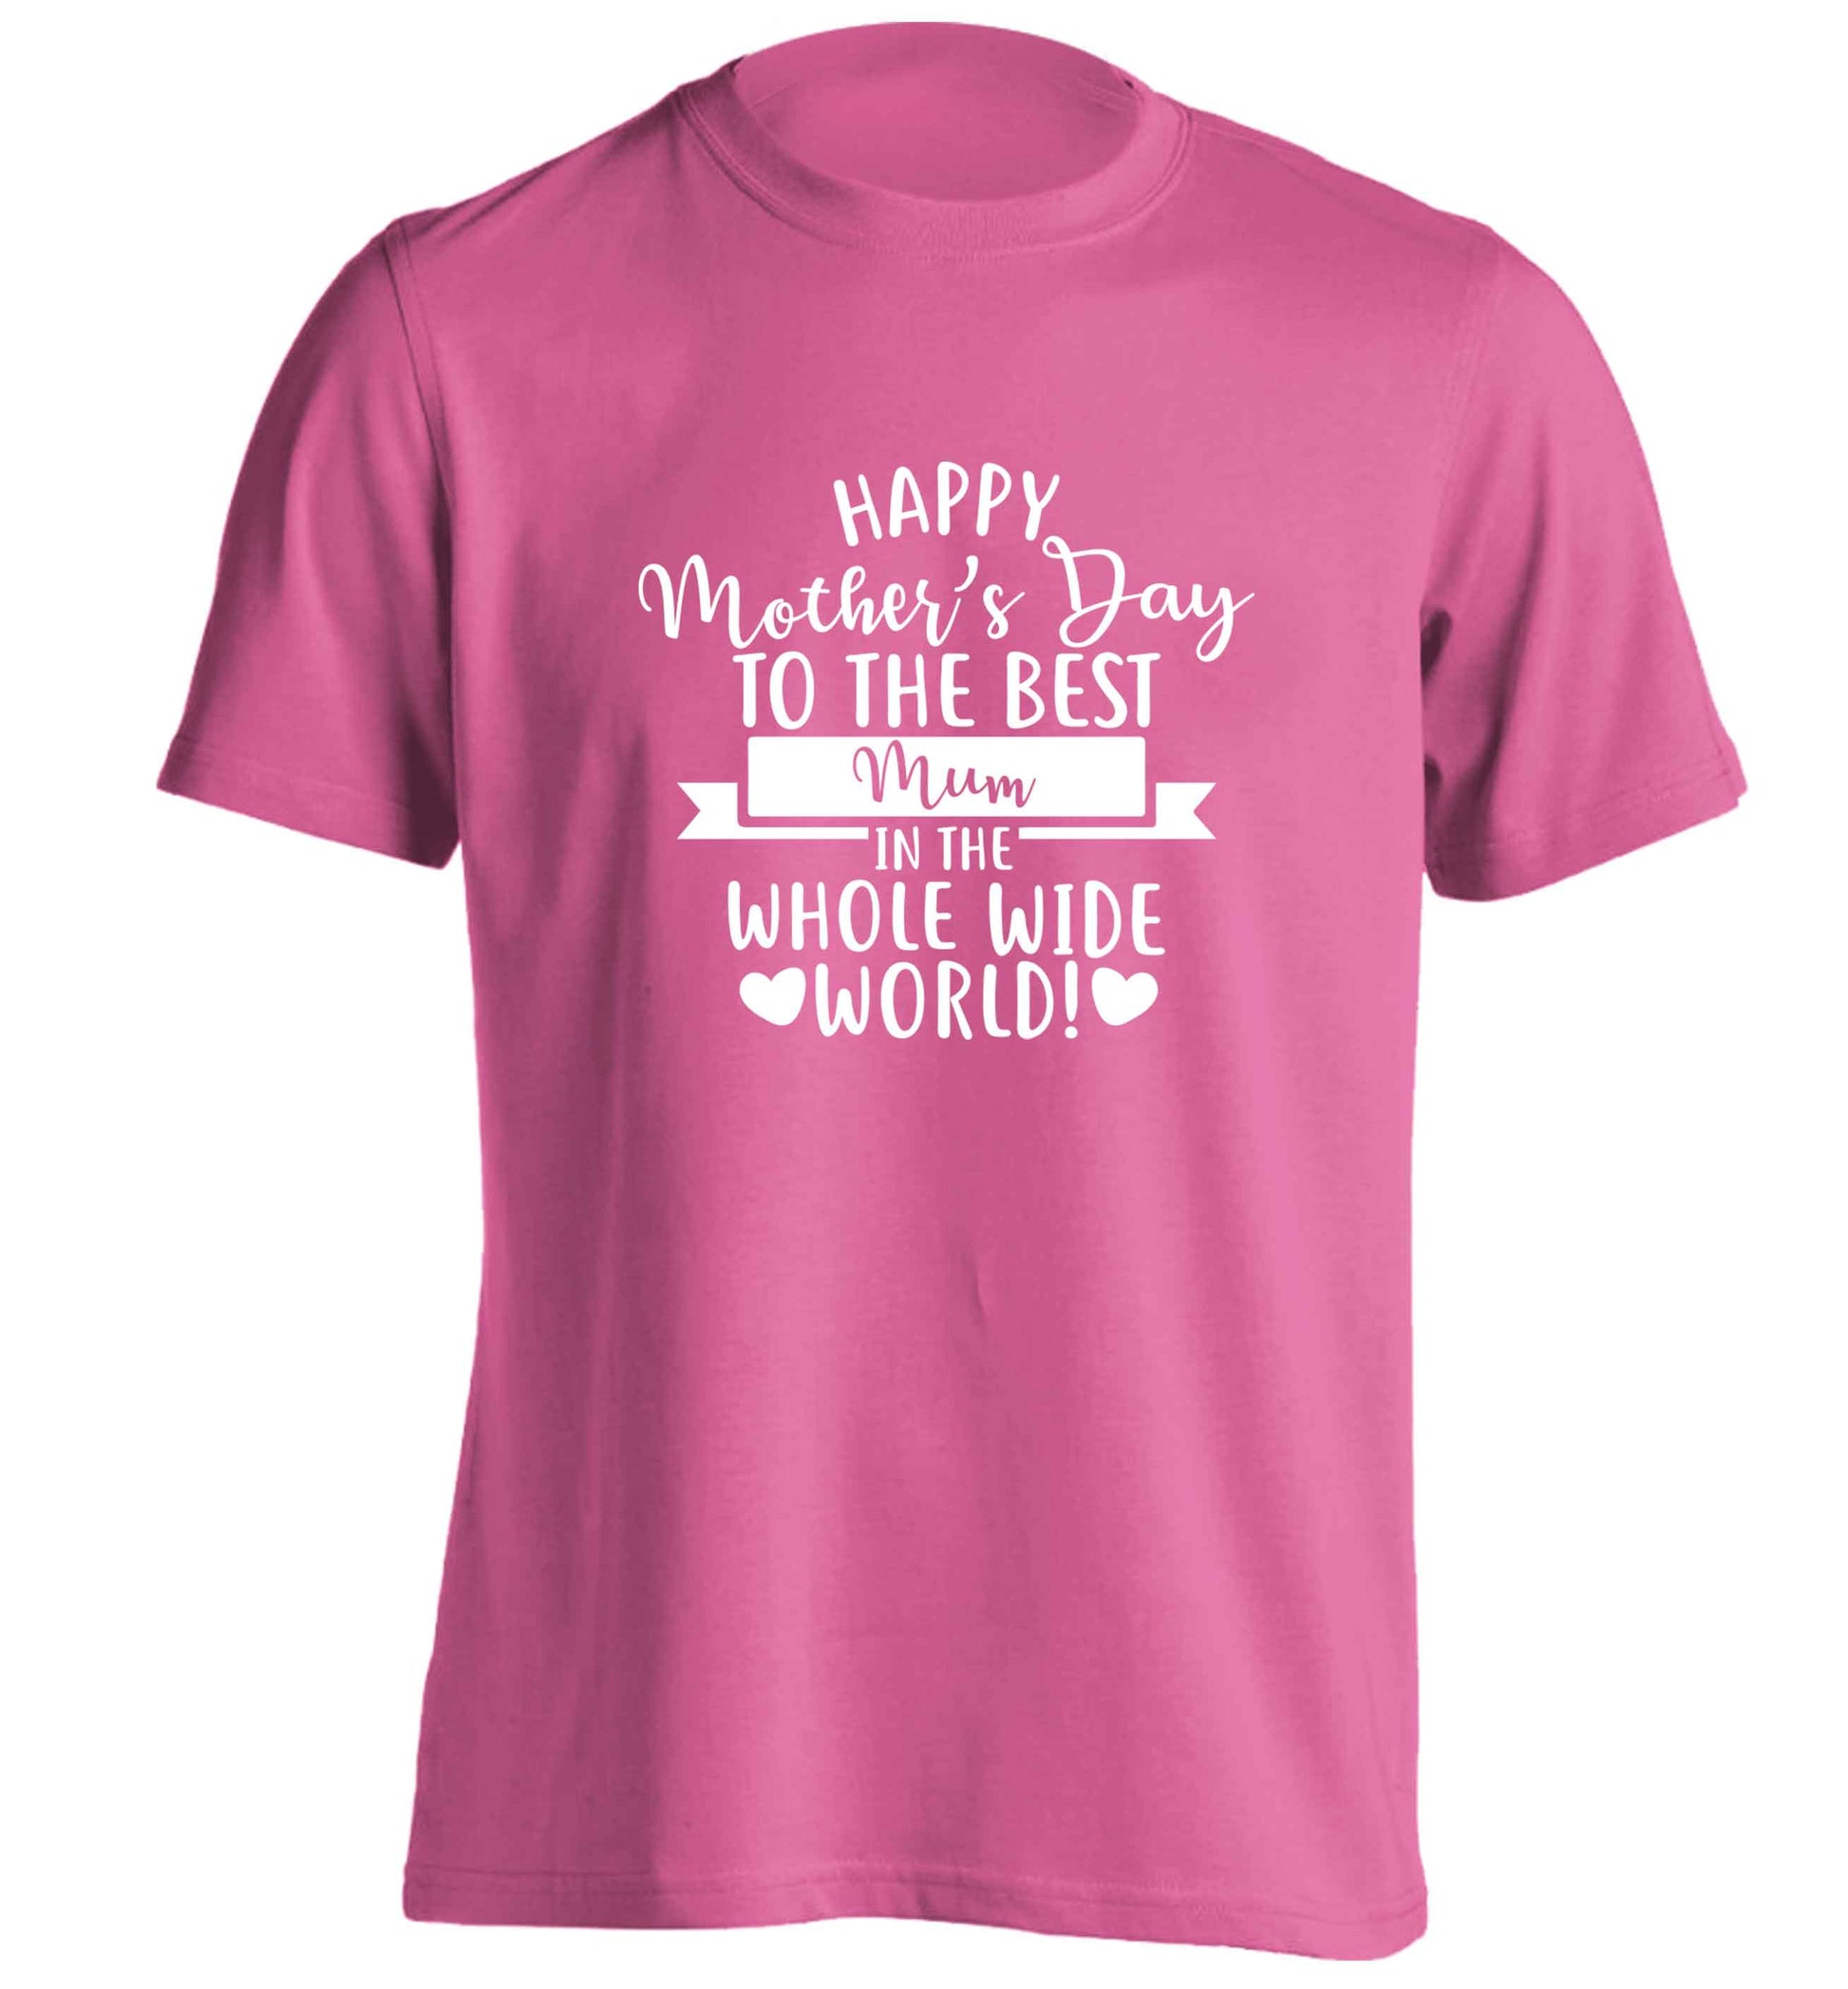 Happy mother's day to the best mum in the world adults unisex pink Tshirt 2XL